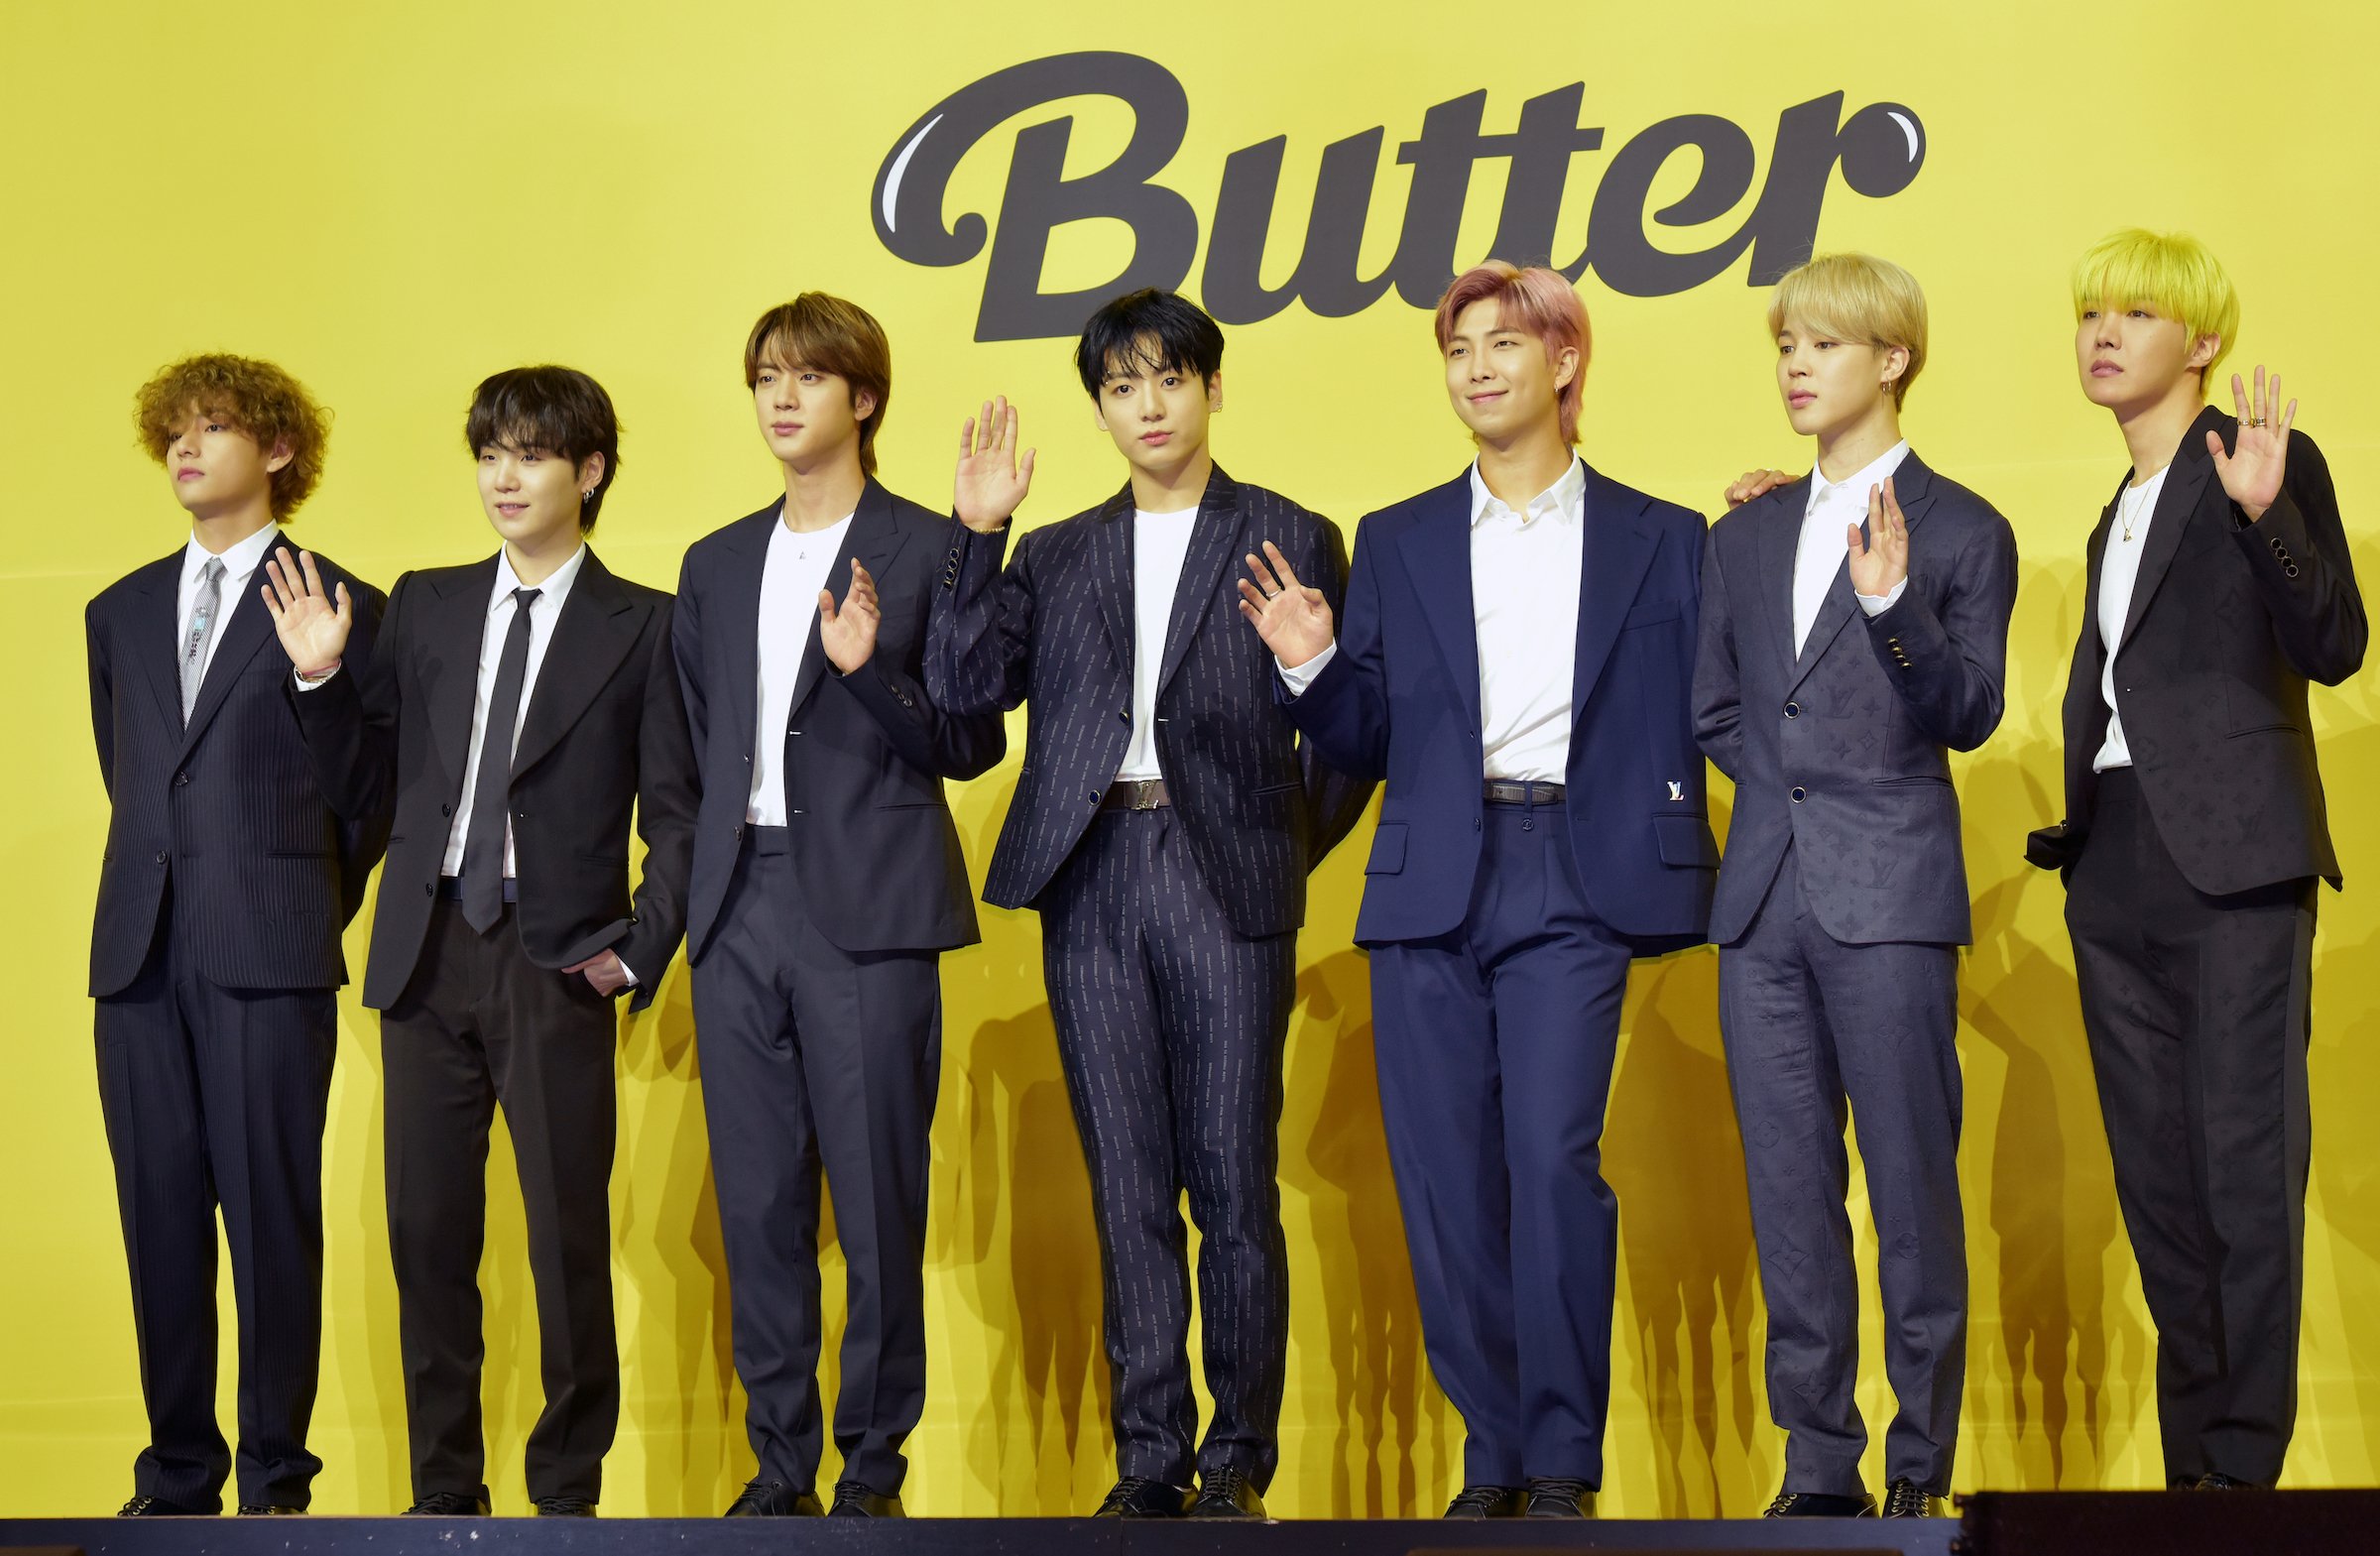 BTS attends a press conference for BTS's new digital single 'Butter' in Seoul, South Korea